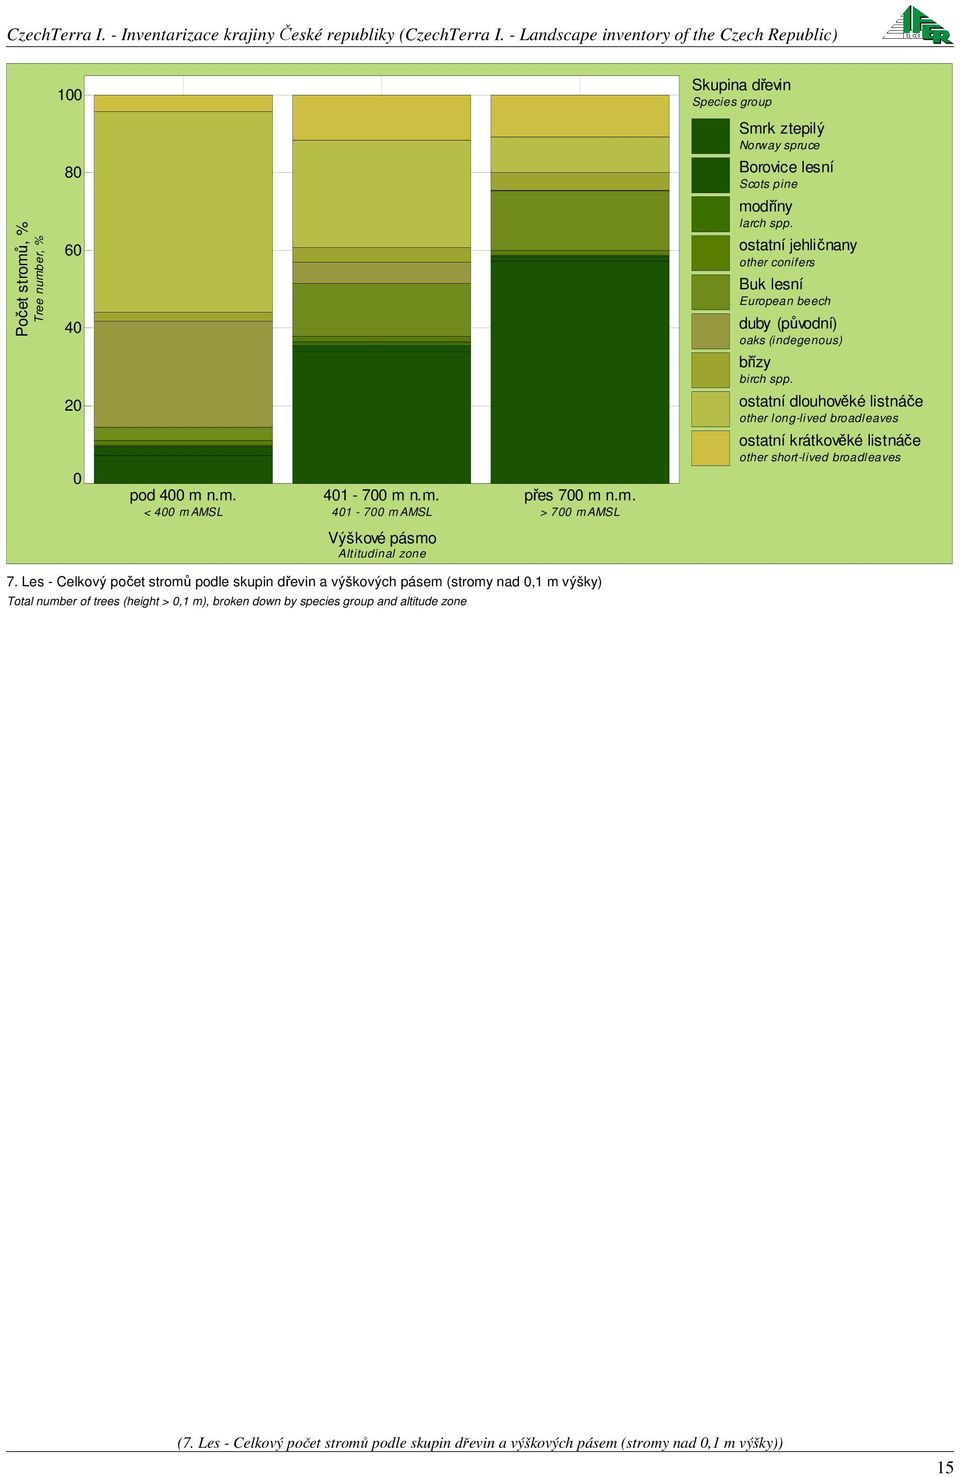 trees (height > 0, m), broken down by species group and altitude zone (7.